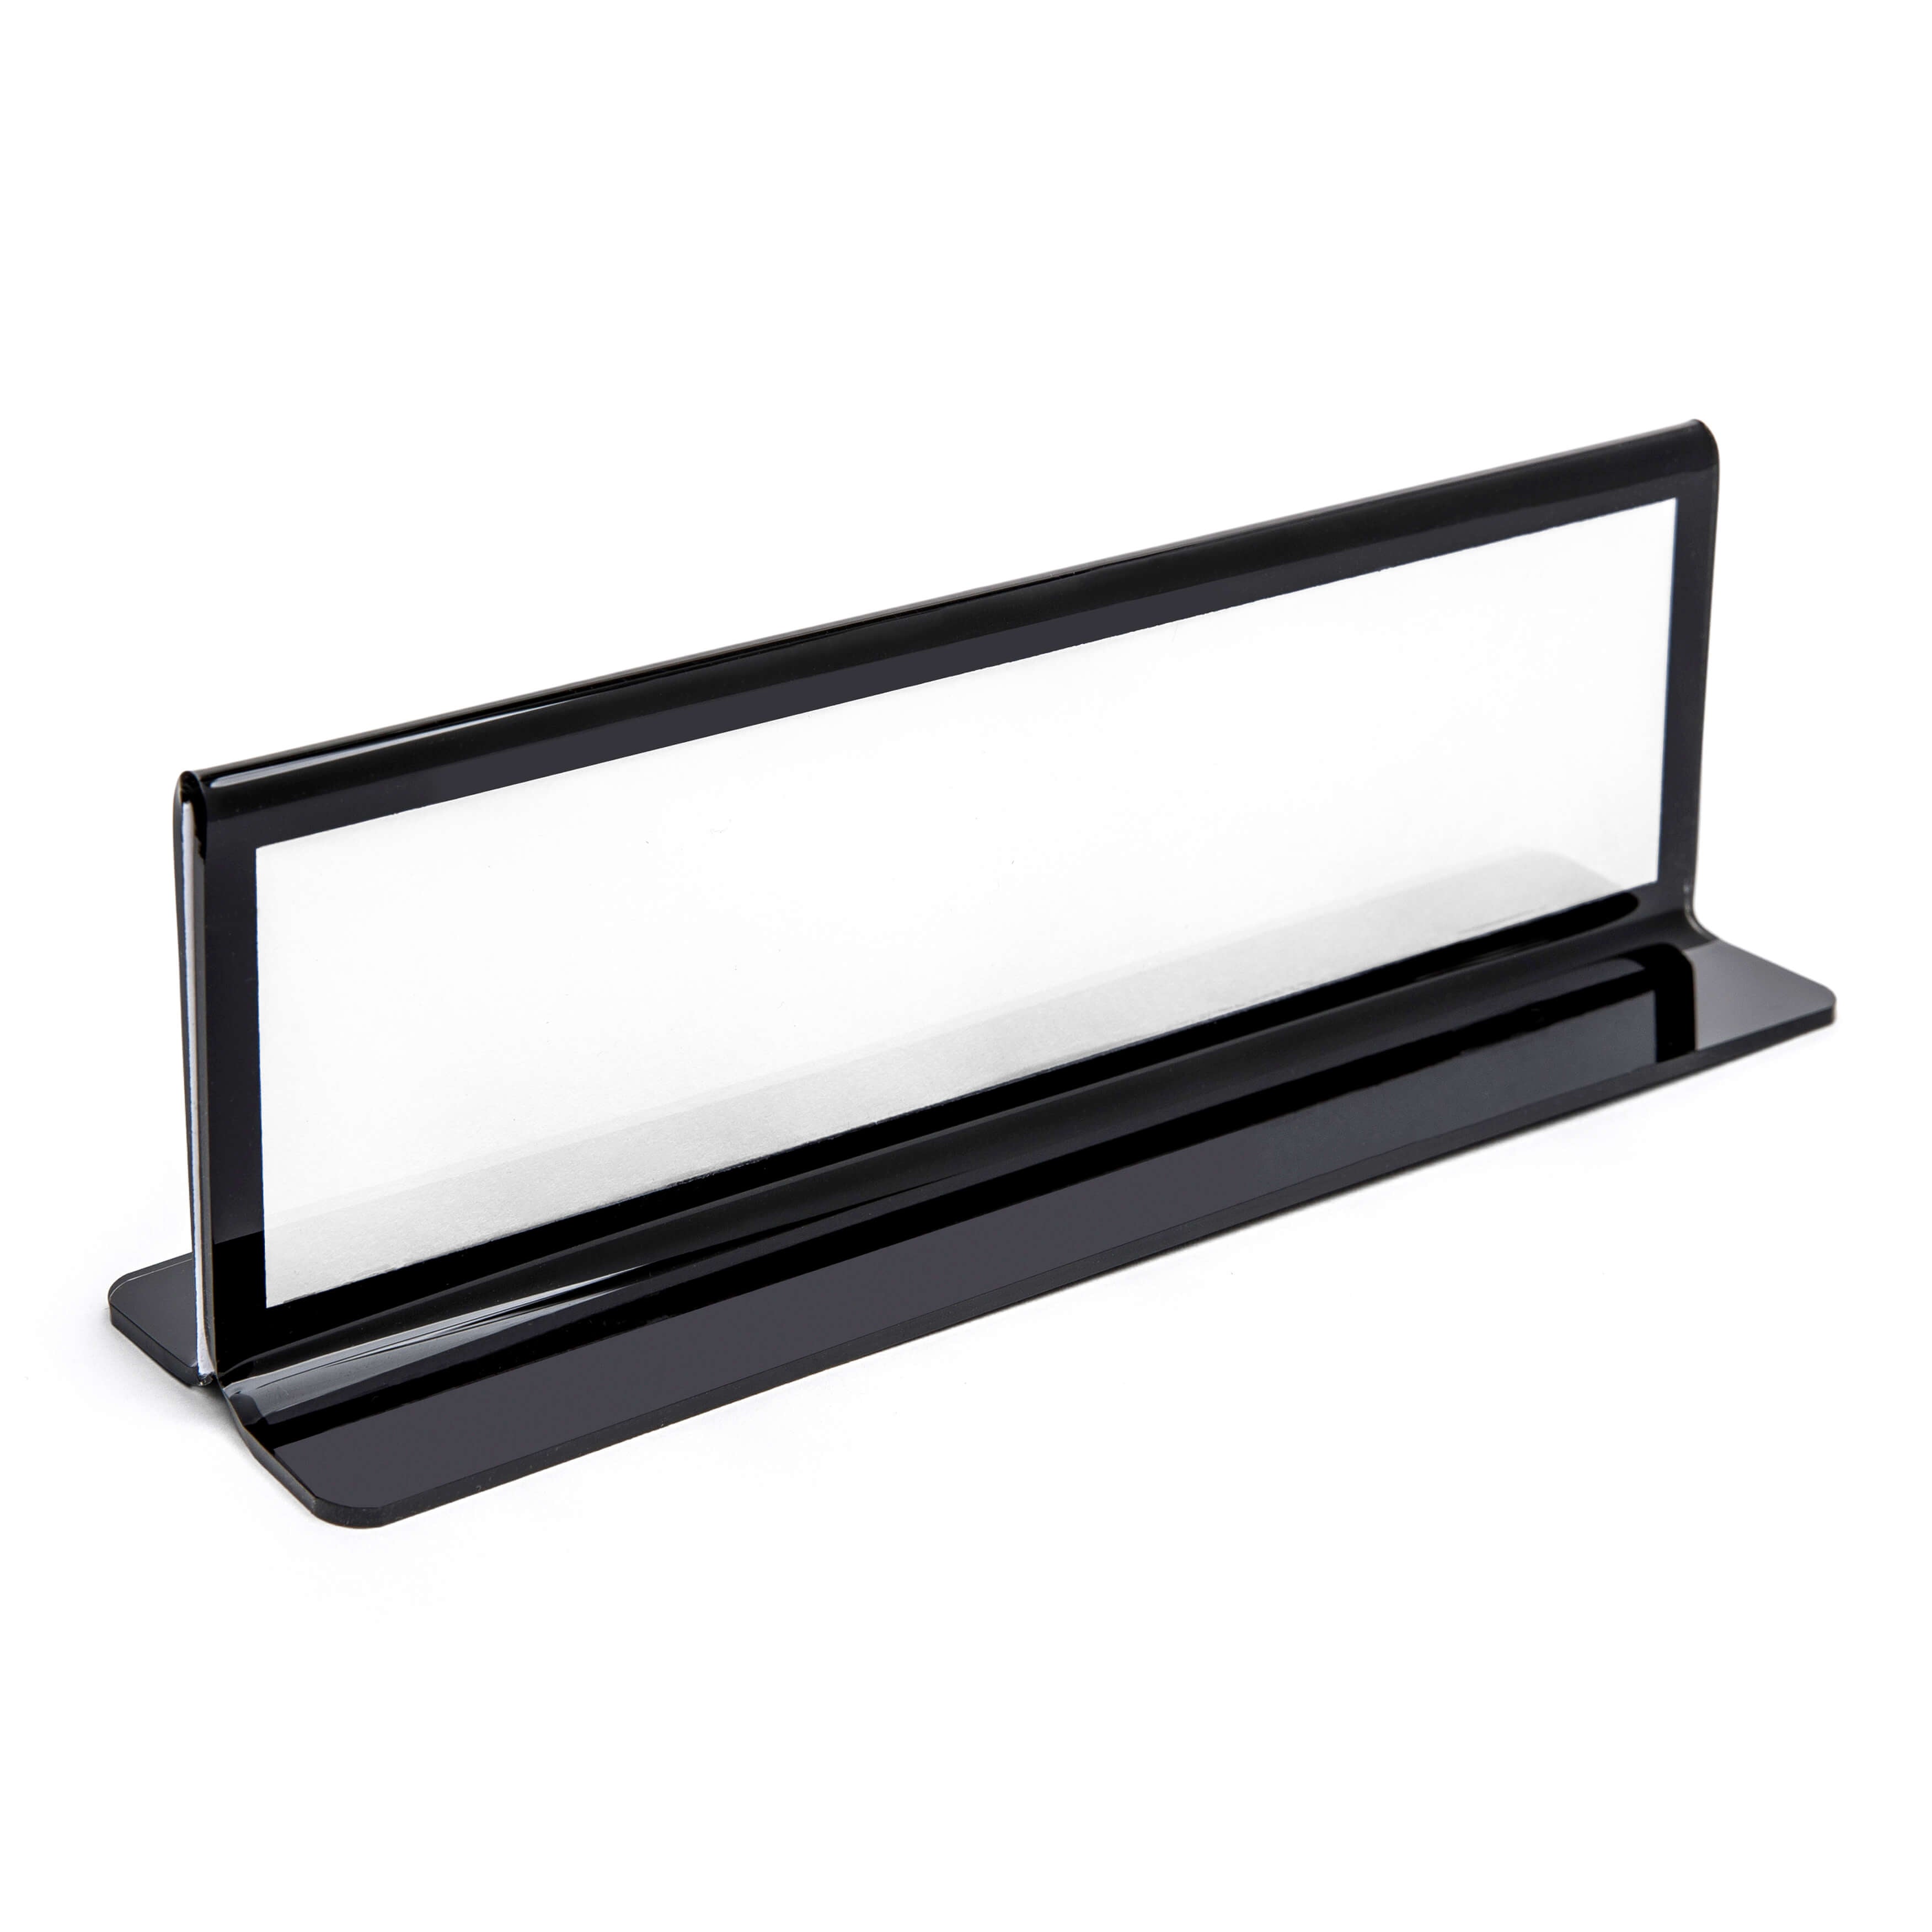 Shop Acrylic Sign Holders with Card Pockets | Plastic Products Mfg –  Plastic Products Mfg.